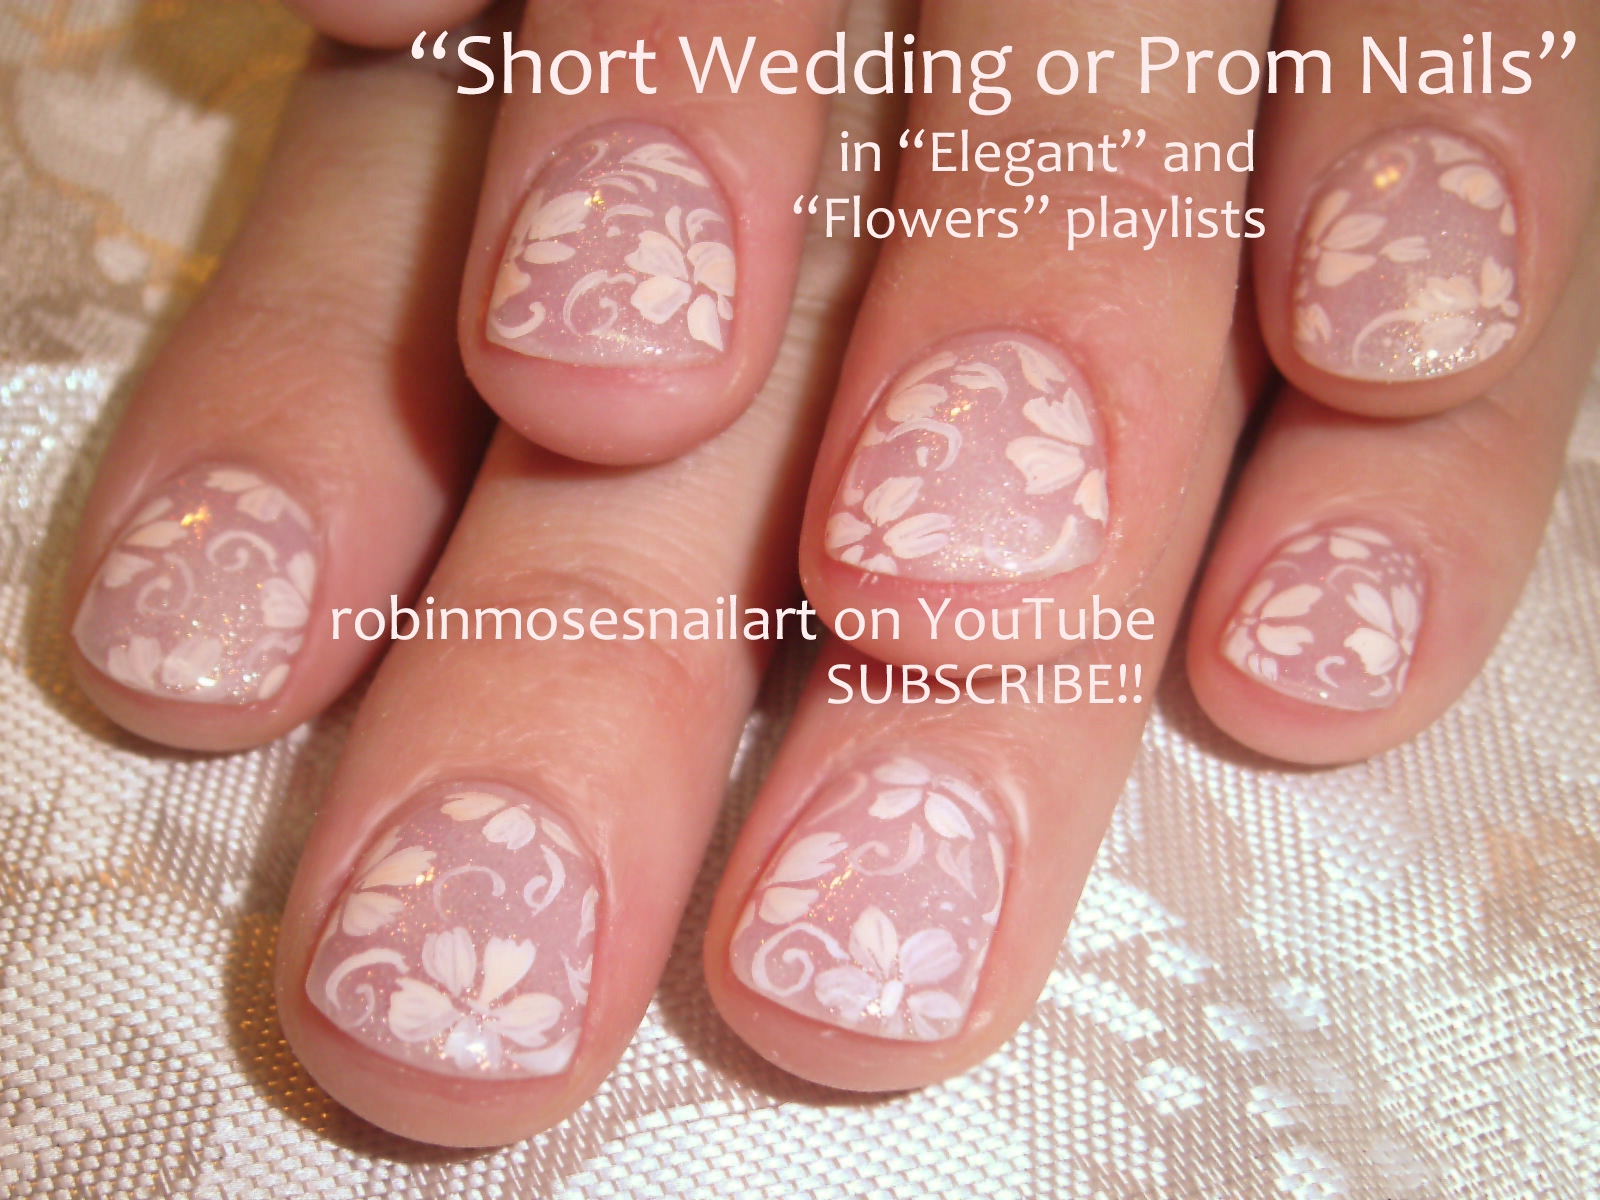 1. Contoh Nail Art Wedding Simple - wide 5